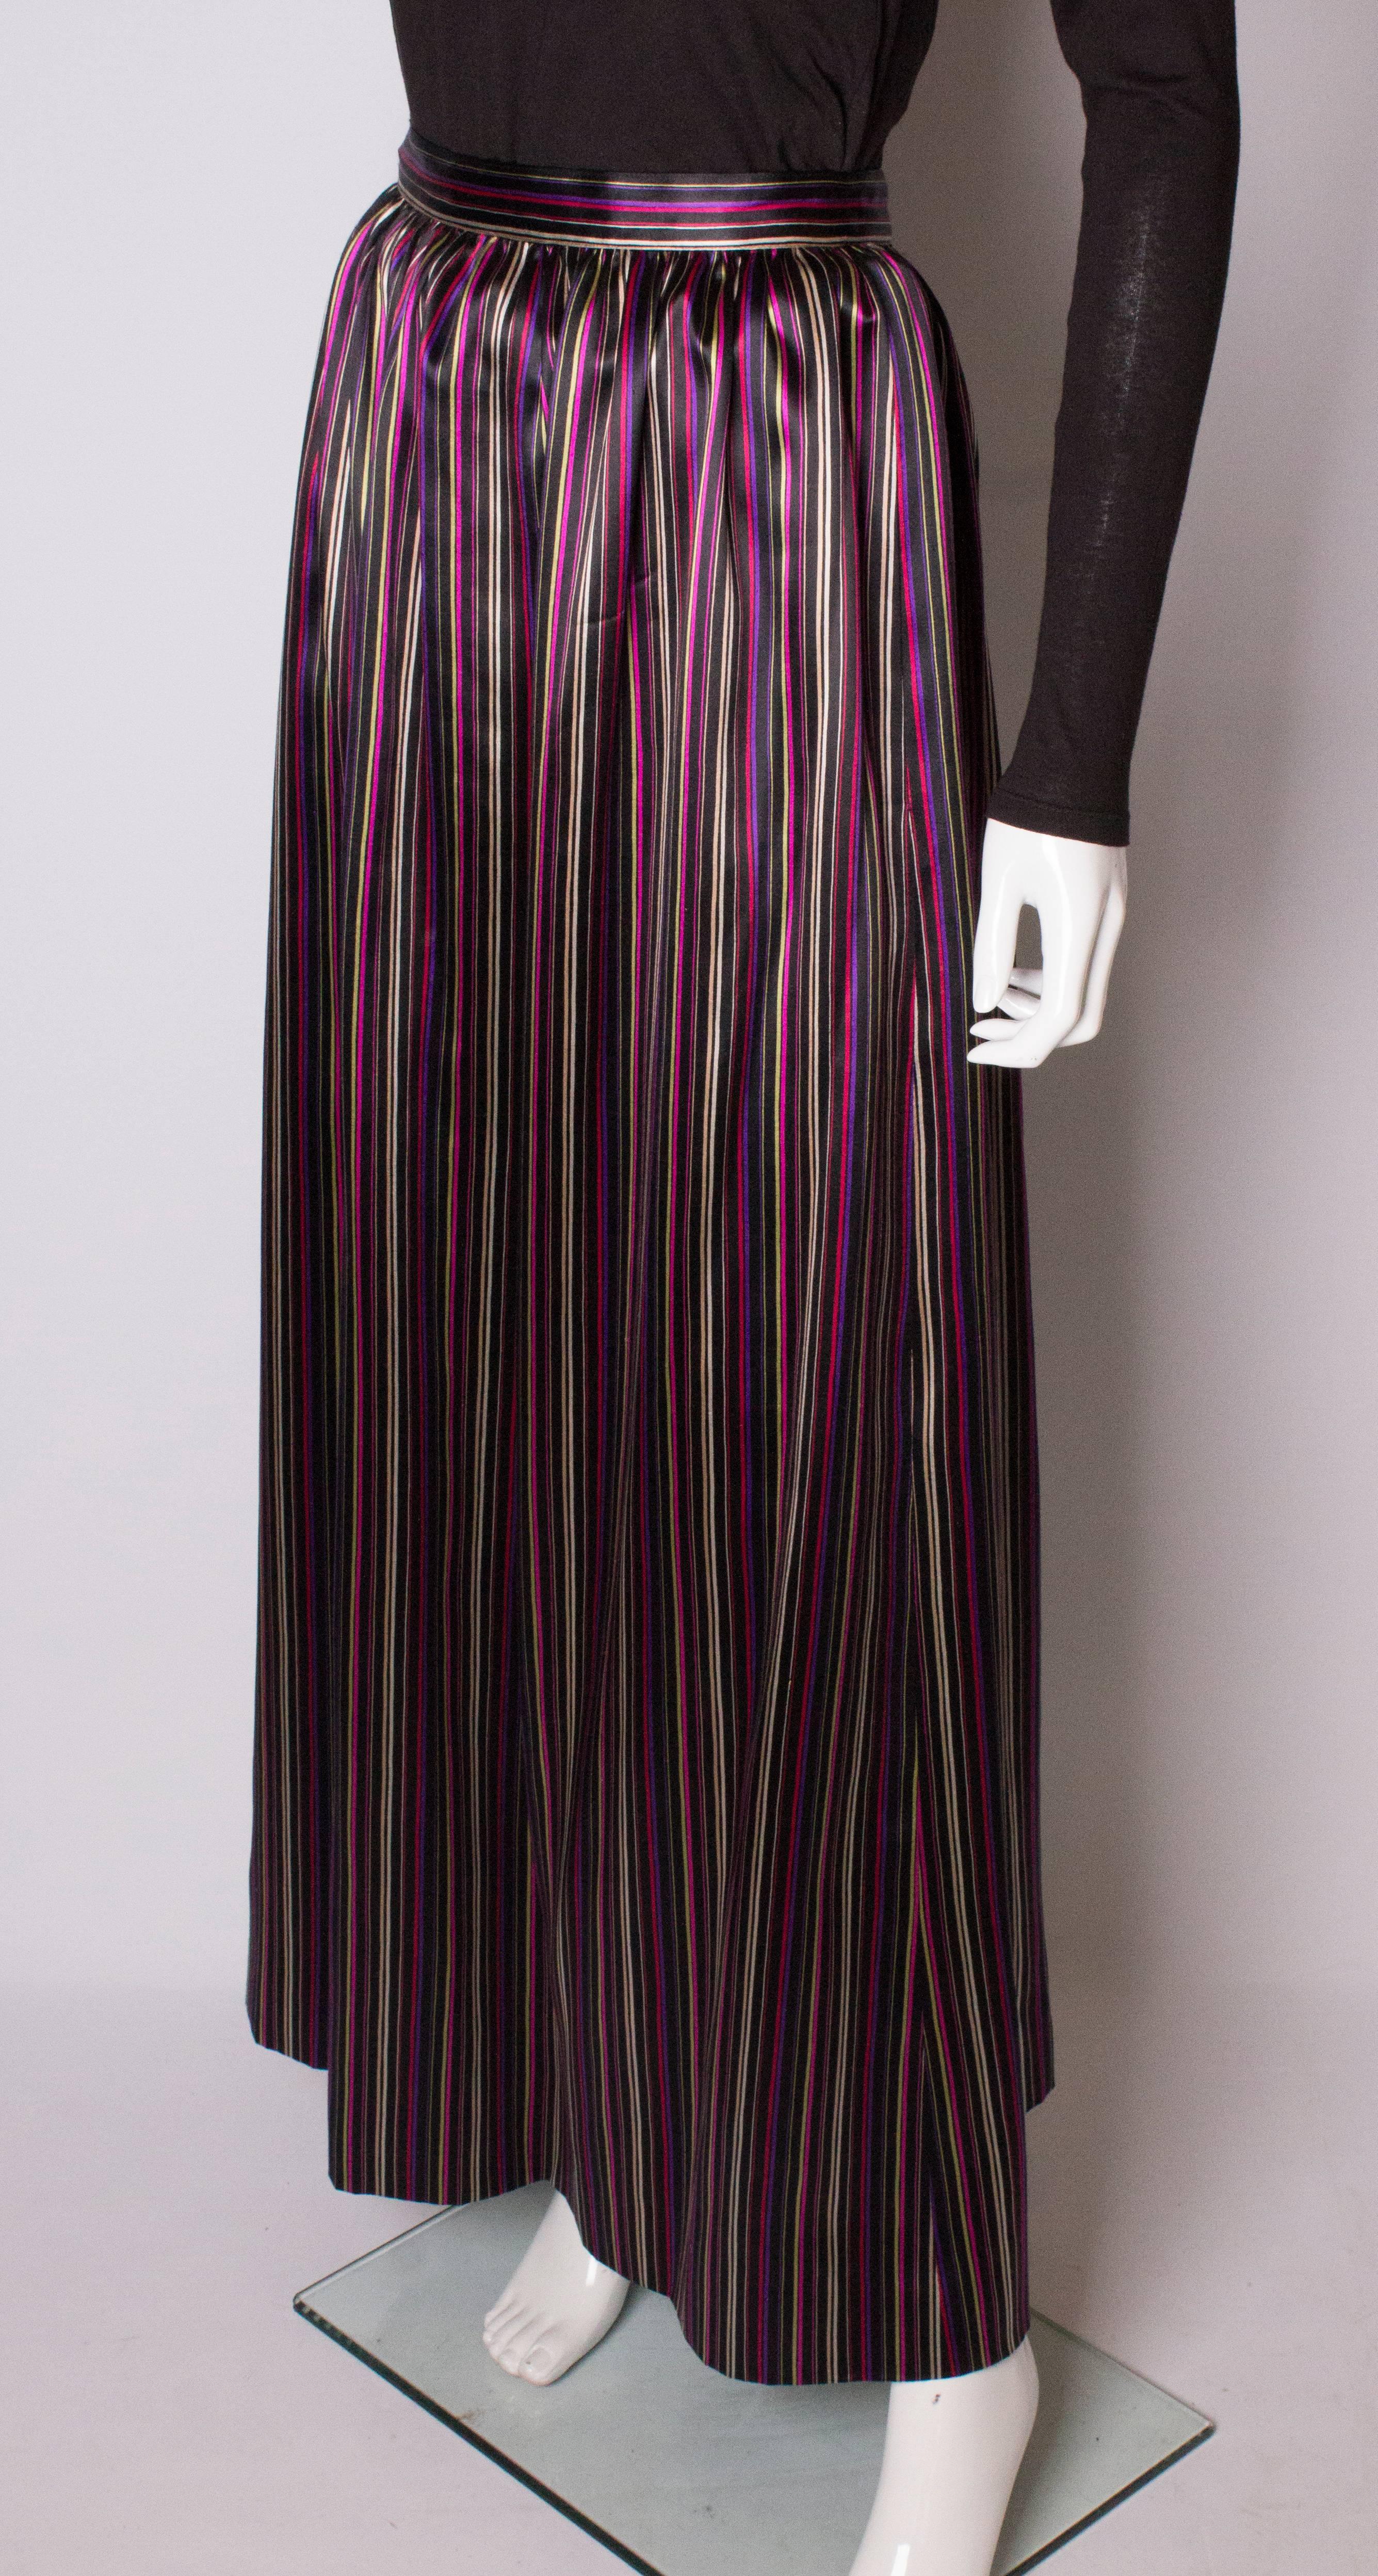 givenchy pleated skirt